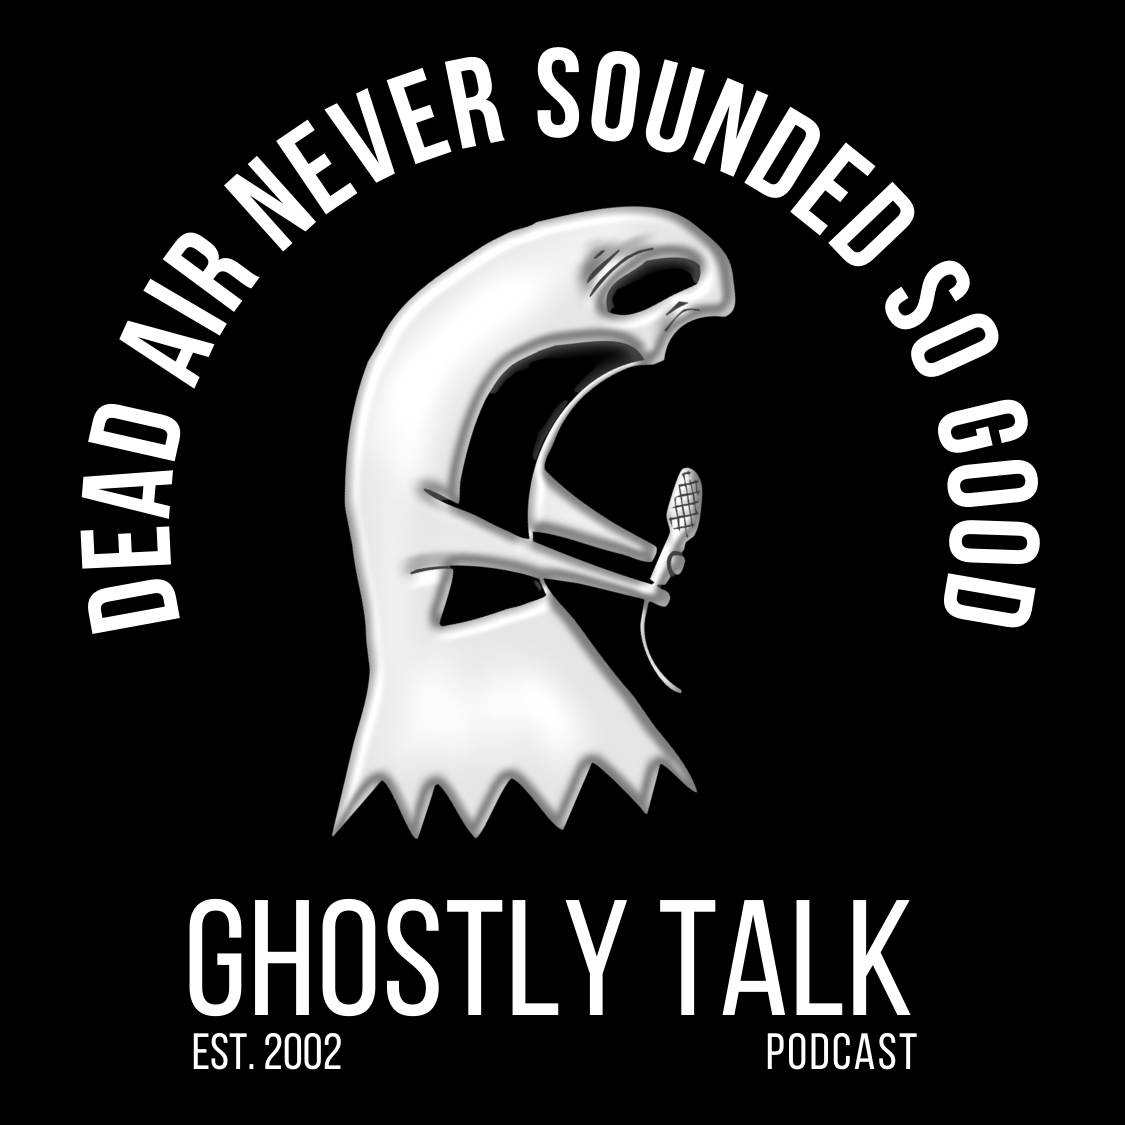 Image of a ghost screaming into a microphone for the Ghostly Talk Podcast. Logo says "Dead Air Never Sounded So Good." Established 2002